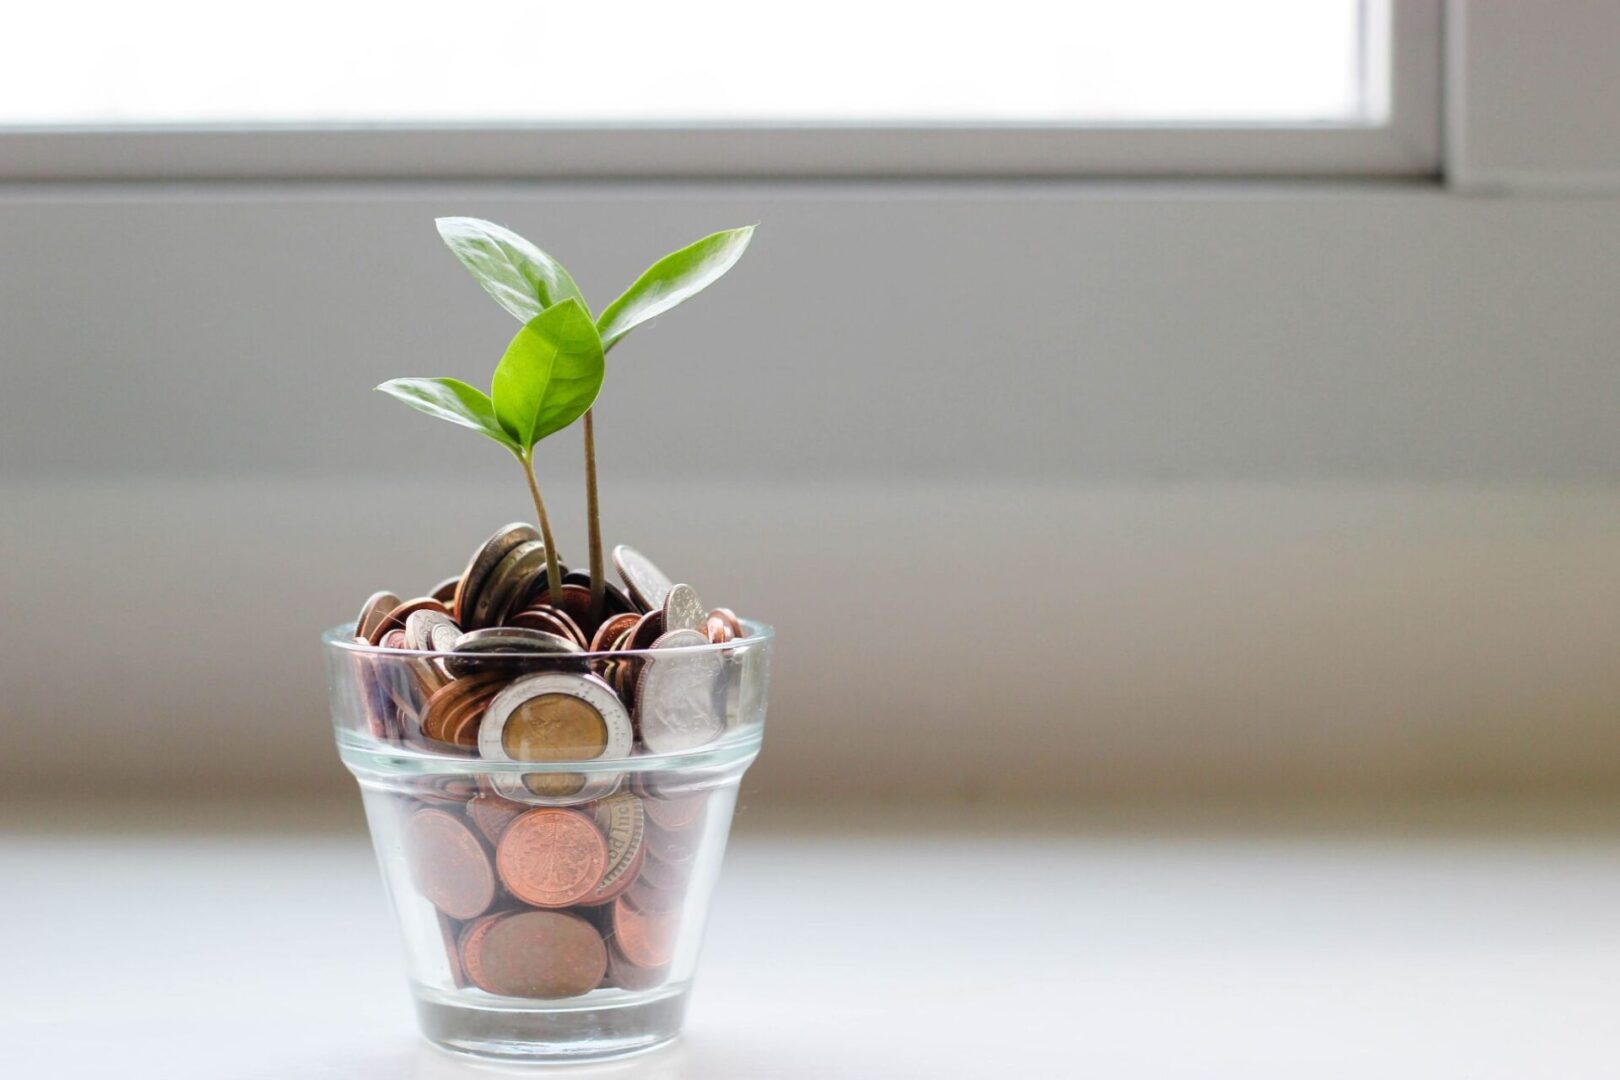 a glass of coins and a plant on the table